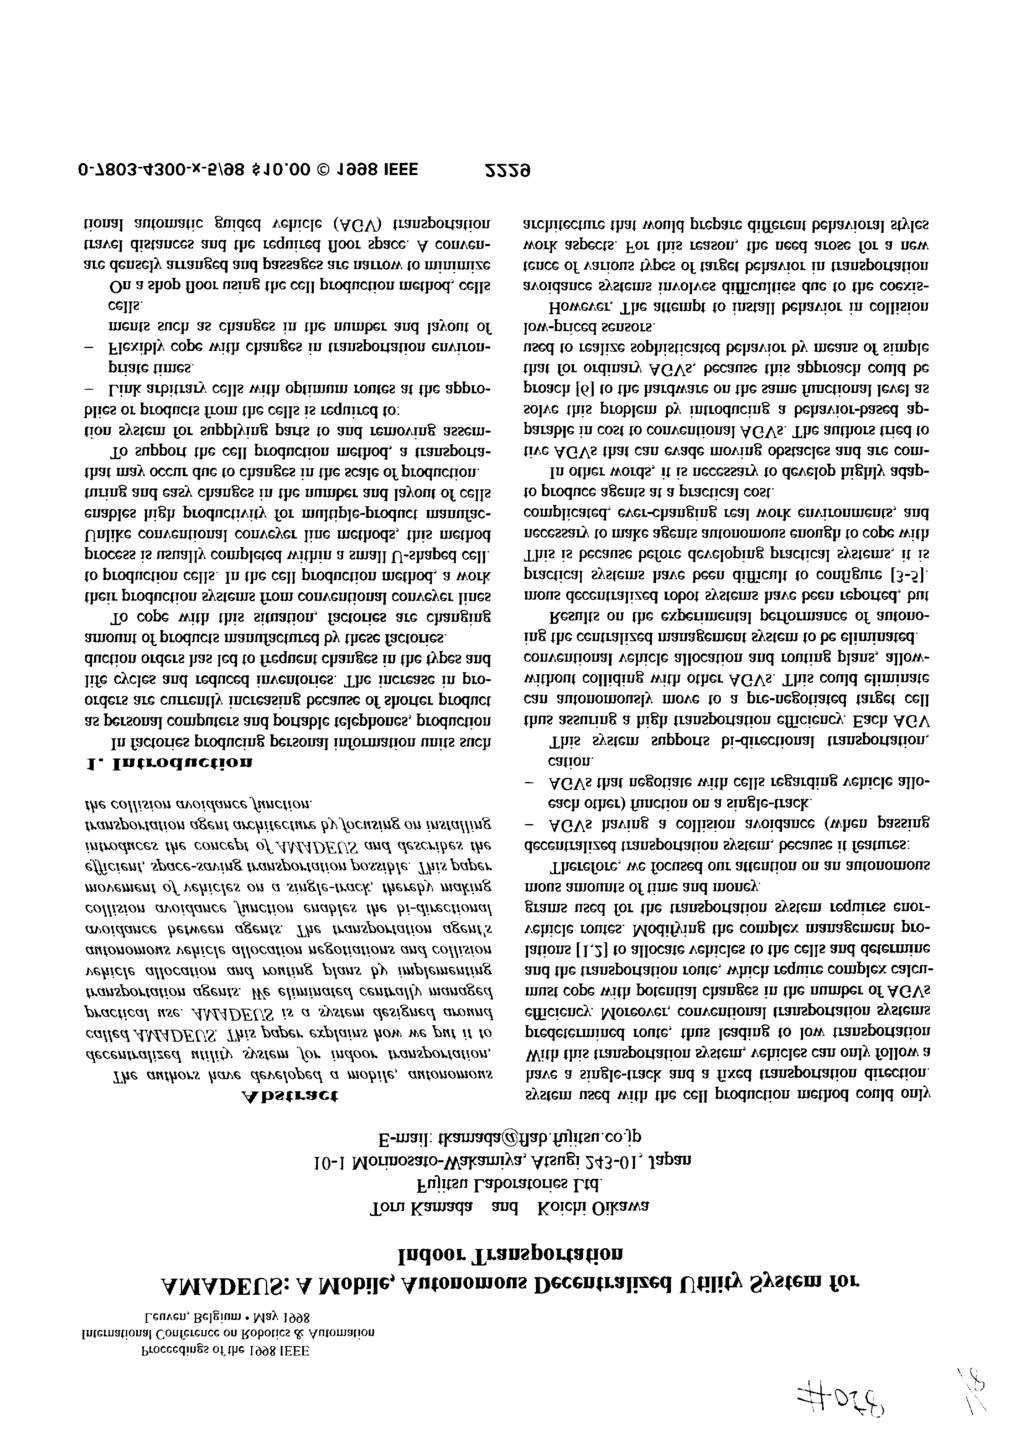 Proceedings of the 1998 IEEE InternationalConference on Robotics & Automation Leuven, Belgium May 1998 AMADEUS: A Mobile, Autonomous Decentralized Utility System for Indoor Transportation i (?